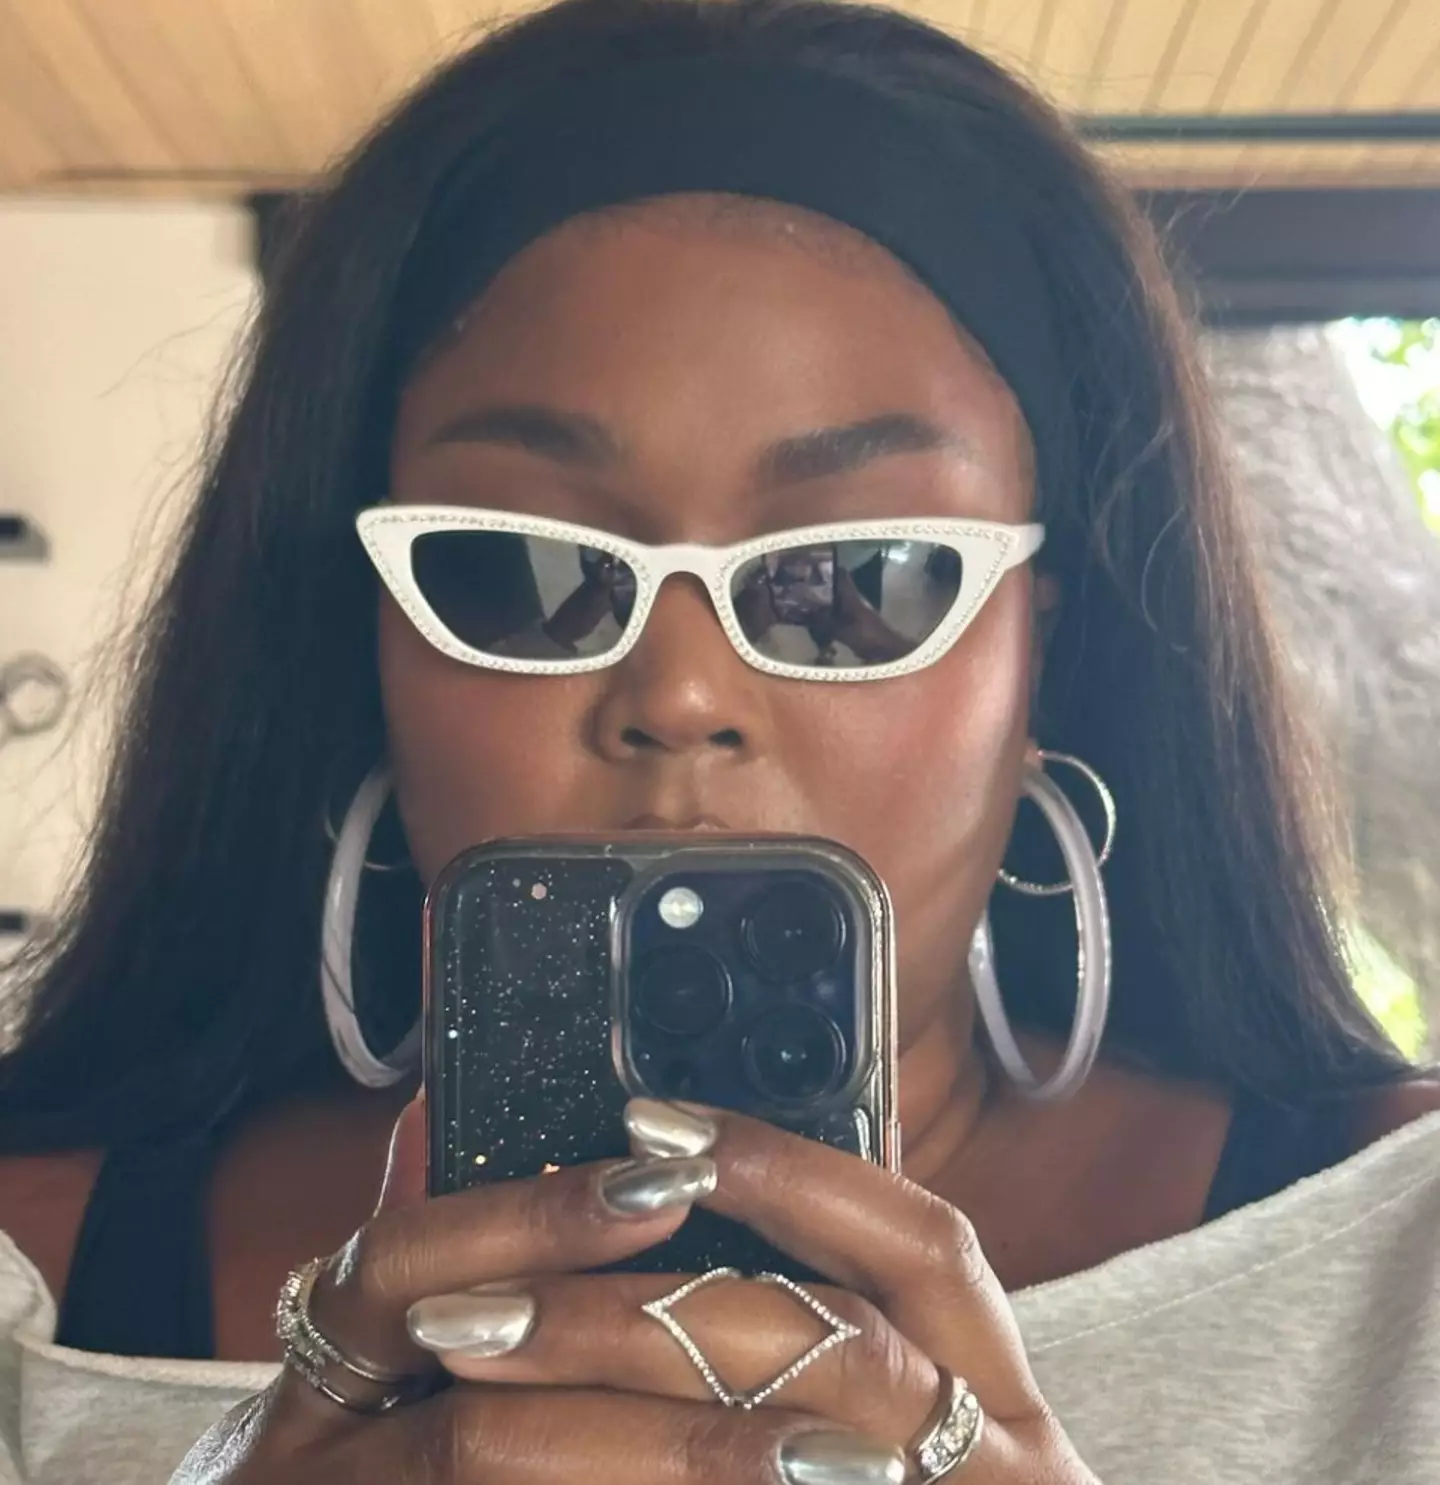 Lizzo has denied the allegations made against her.